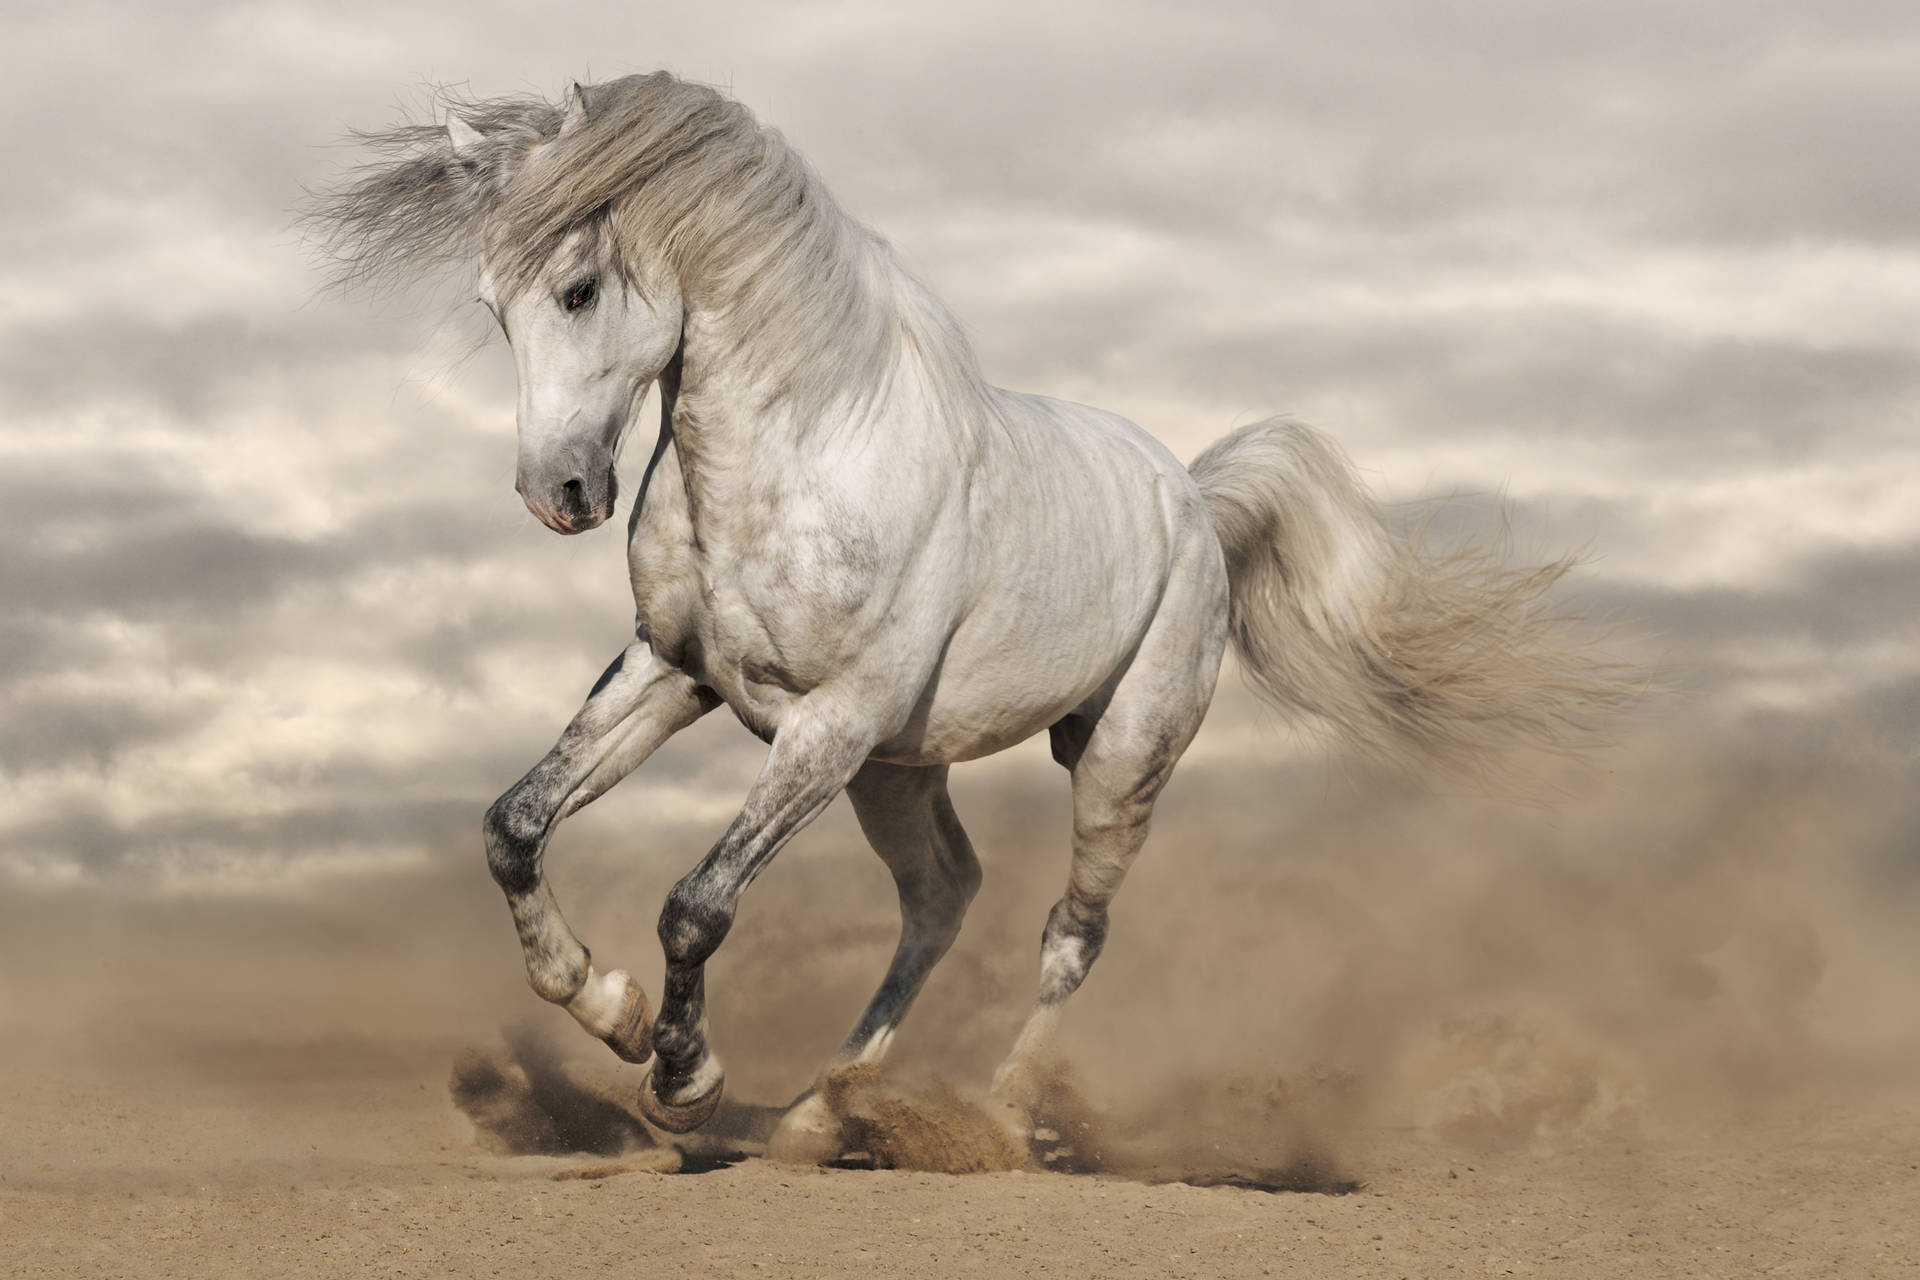 7296X4864 Horse Wallpaper and Background